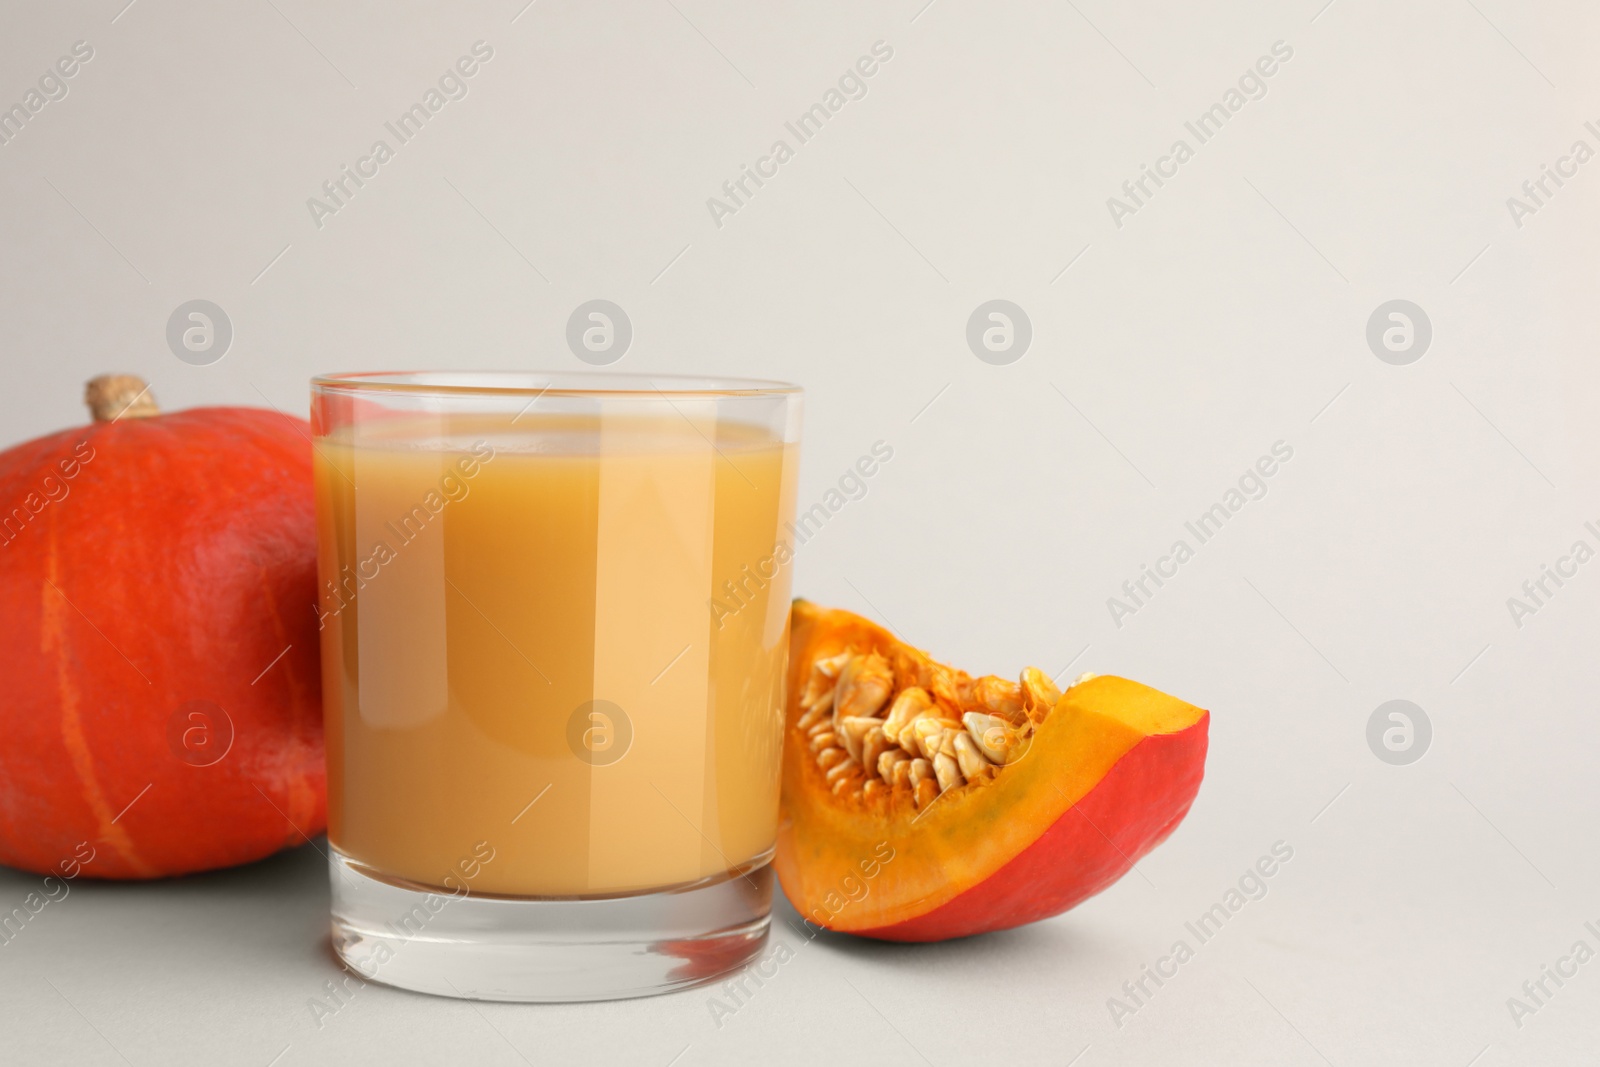 Photo of Tasty pumpkin juice in glass, whole and cut pumpkins on light background. Space for text